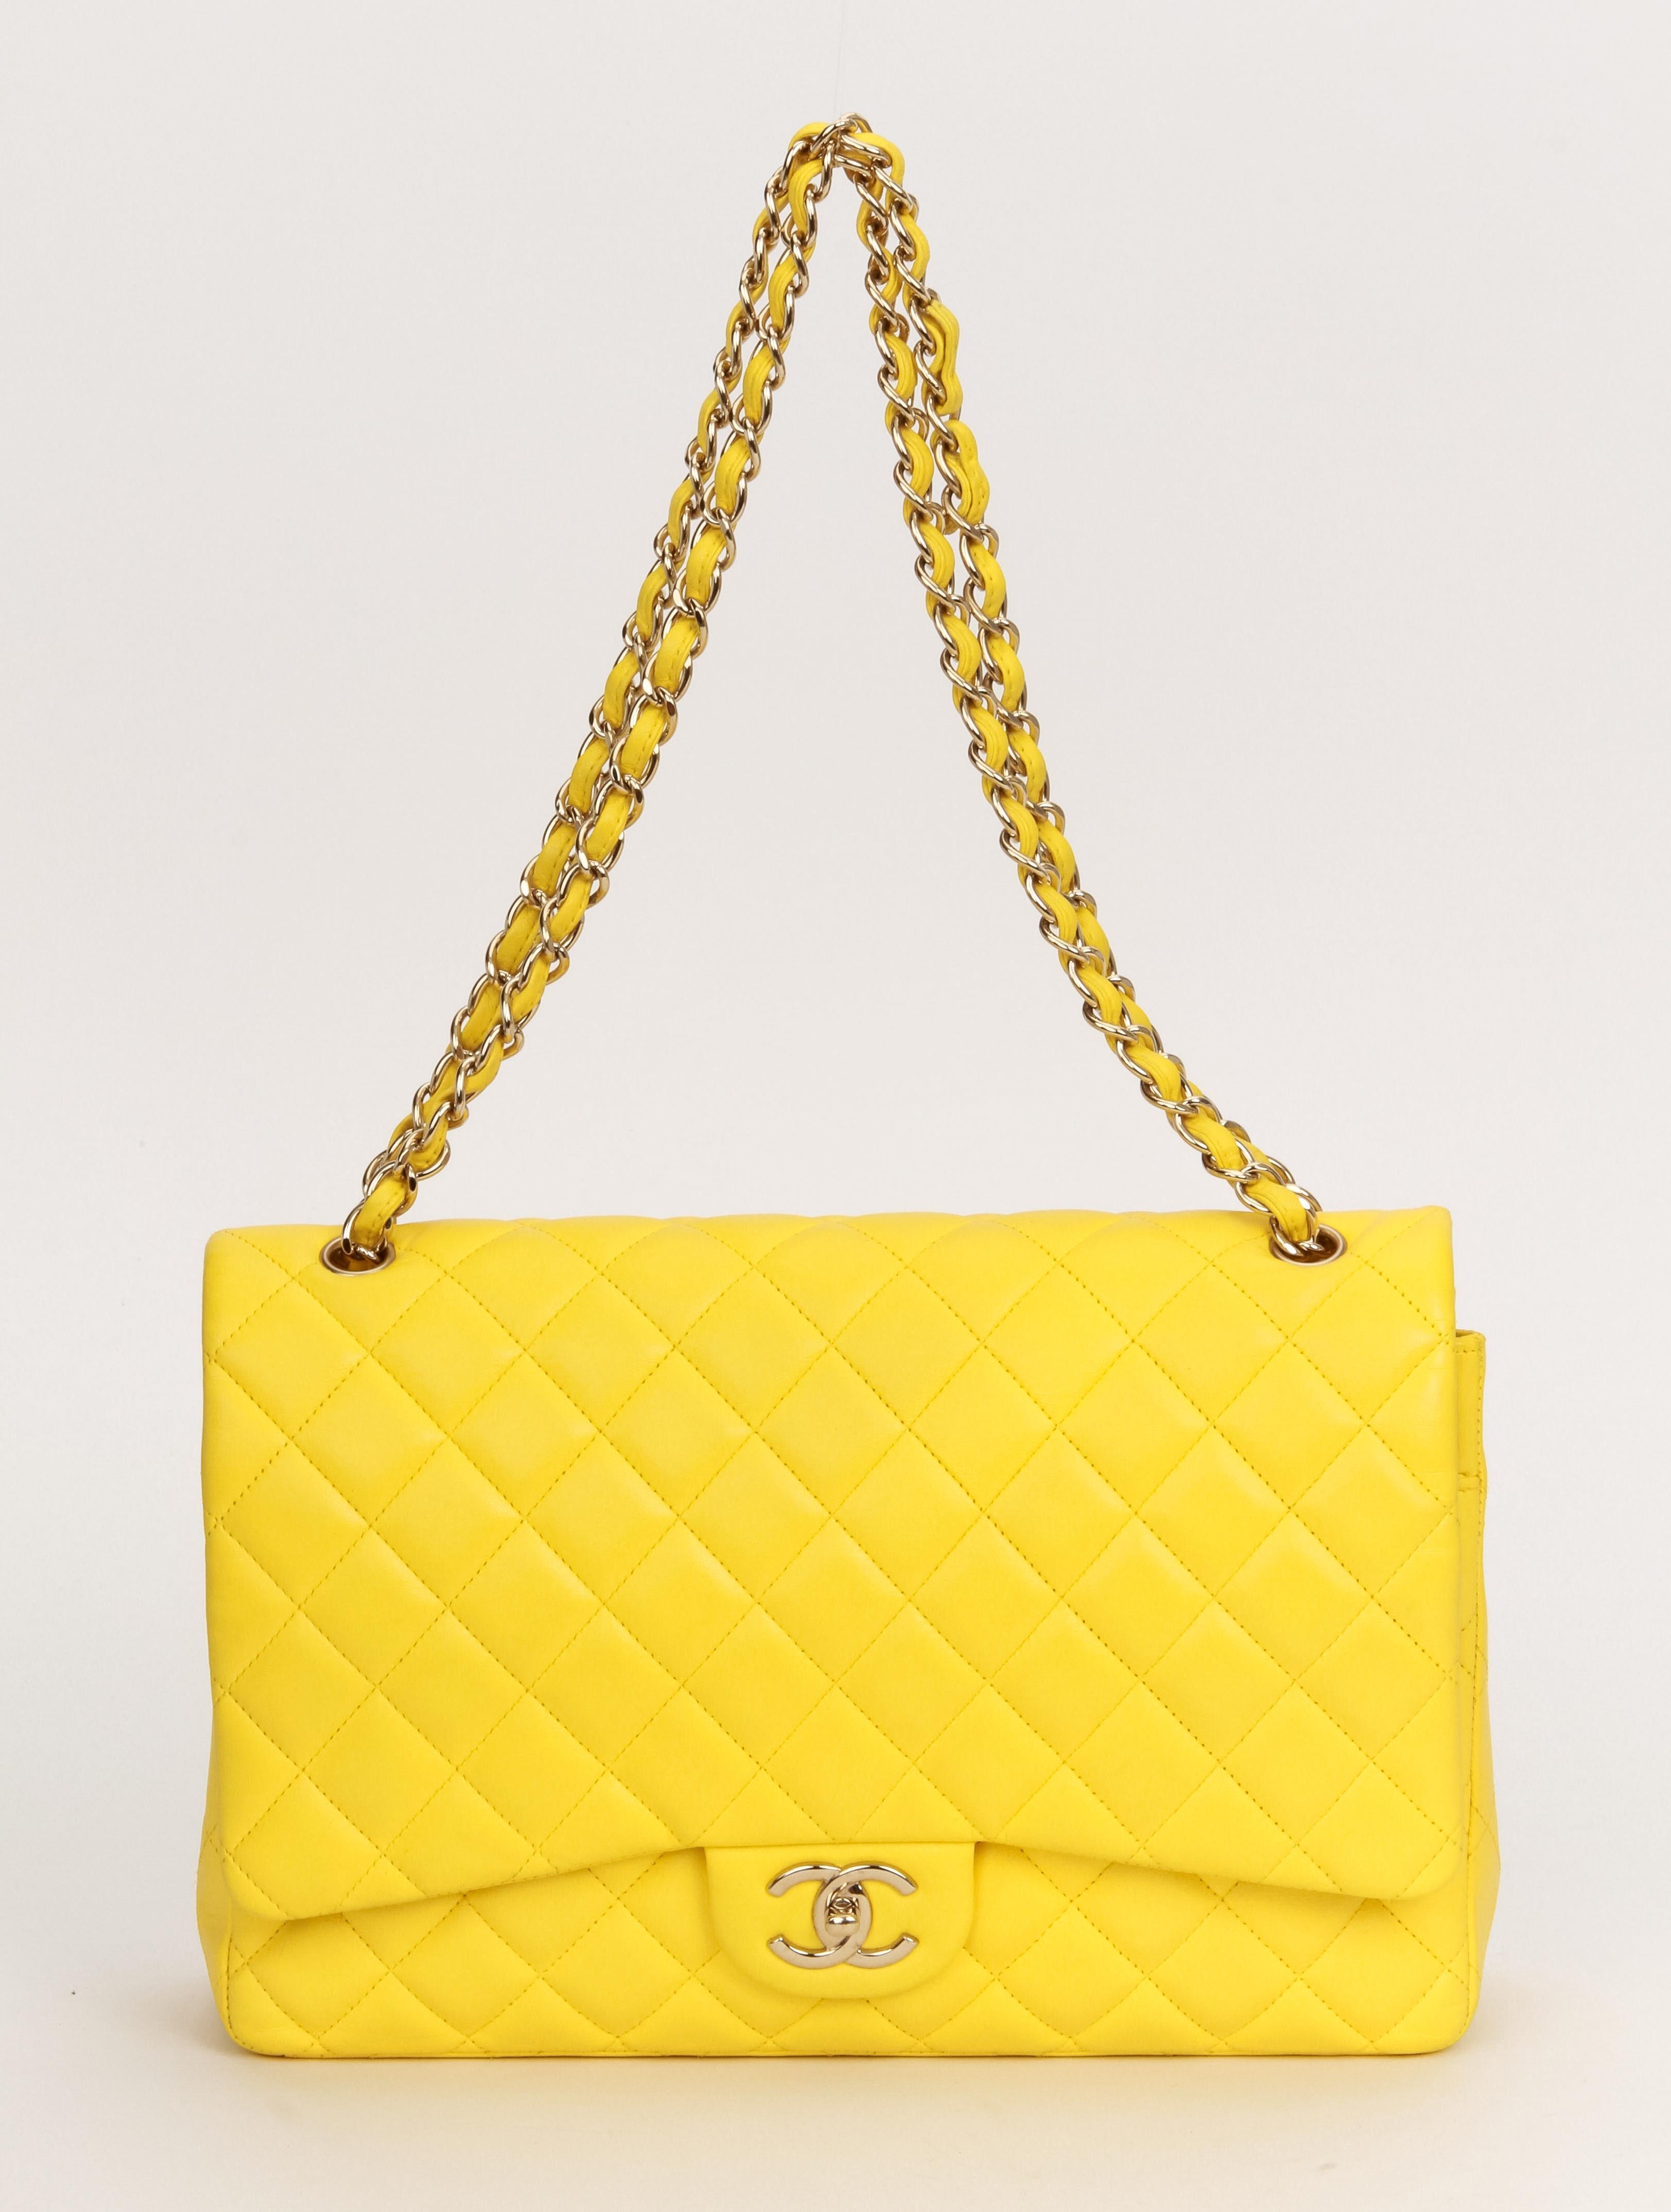 Chanel rare and collectible yellow lambskin maxi double flap with gold tone hardware. Excellent condition, minor signs of wear. Can be worn shoulder or cross body. Store price $9200 plus tax. Collection 15, 2011. Comes with hologram and original